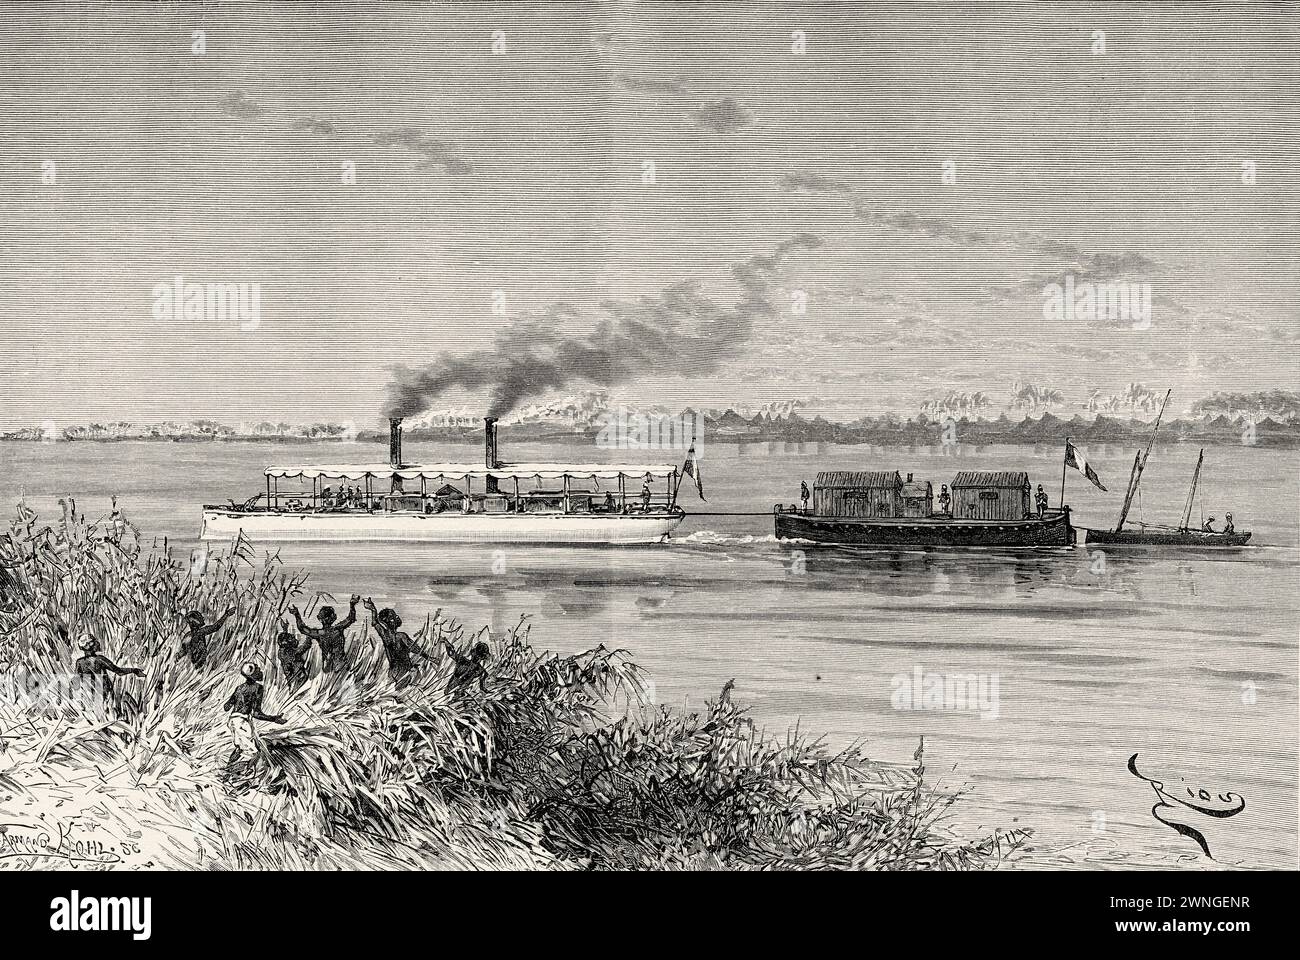 The flotilla of expedition ships on the Niger River, Guinea. Africa. Two campaigns in French Sudan, 1886-1888 by Joseph Simon Gallieni (1849 - 1916) Le Tour du Monde 1890 Stock Photo